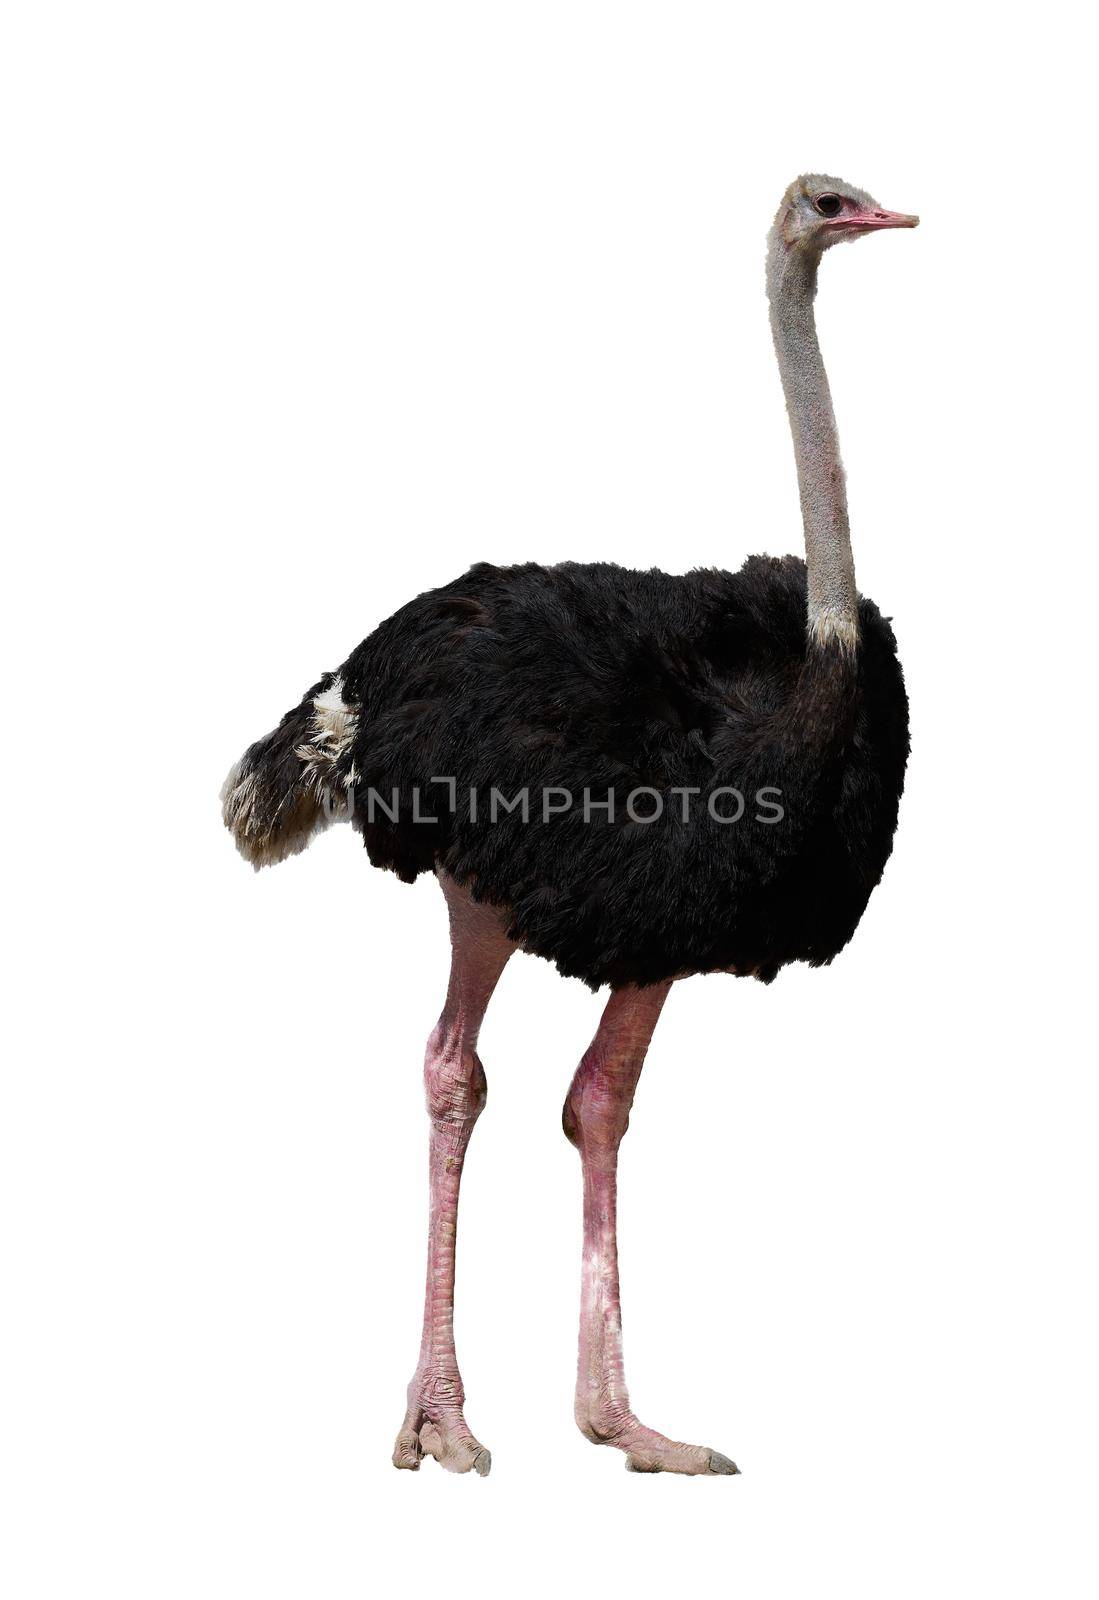 Ostrich in portrait full body side view on isolated white background by VacharapongW